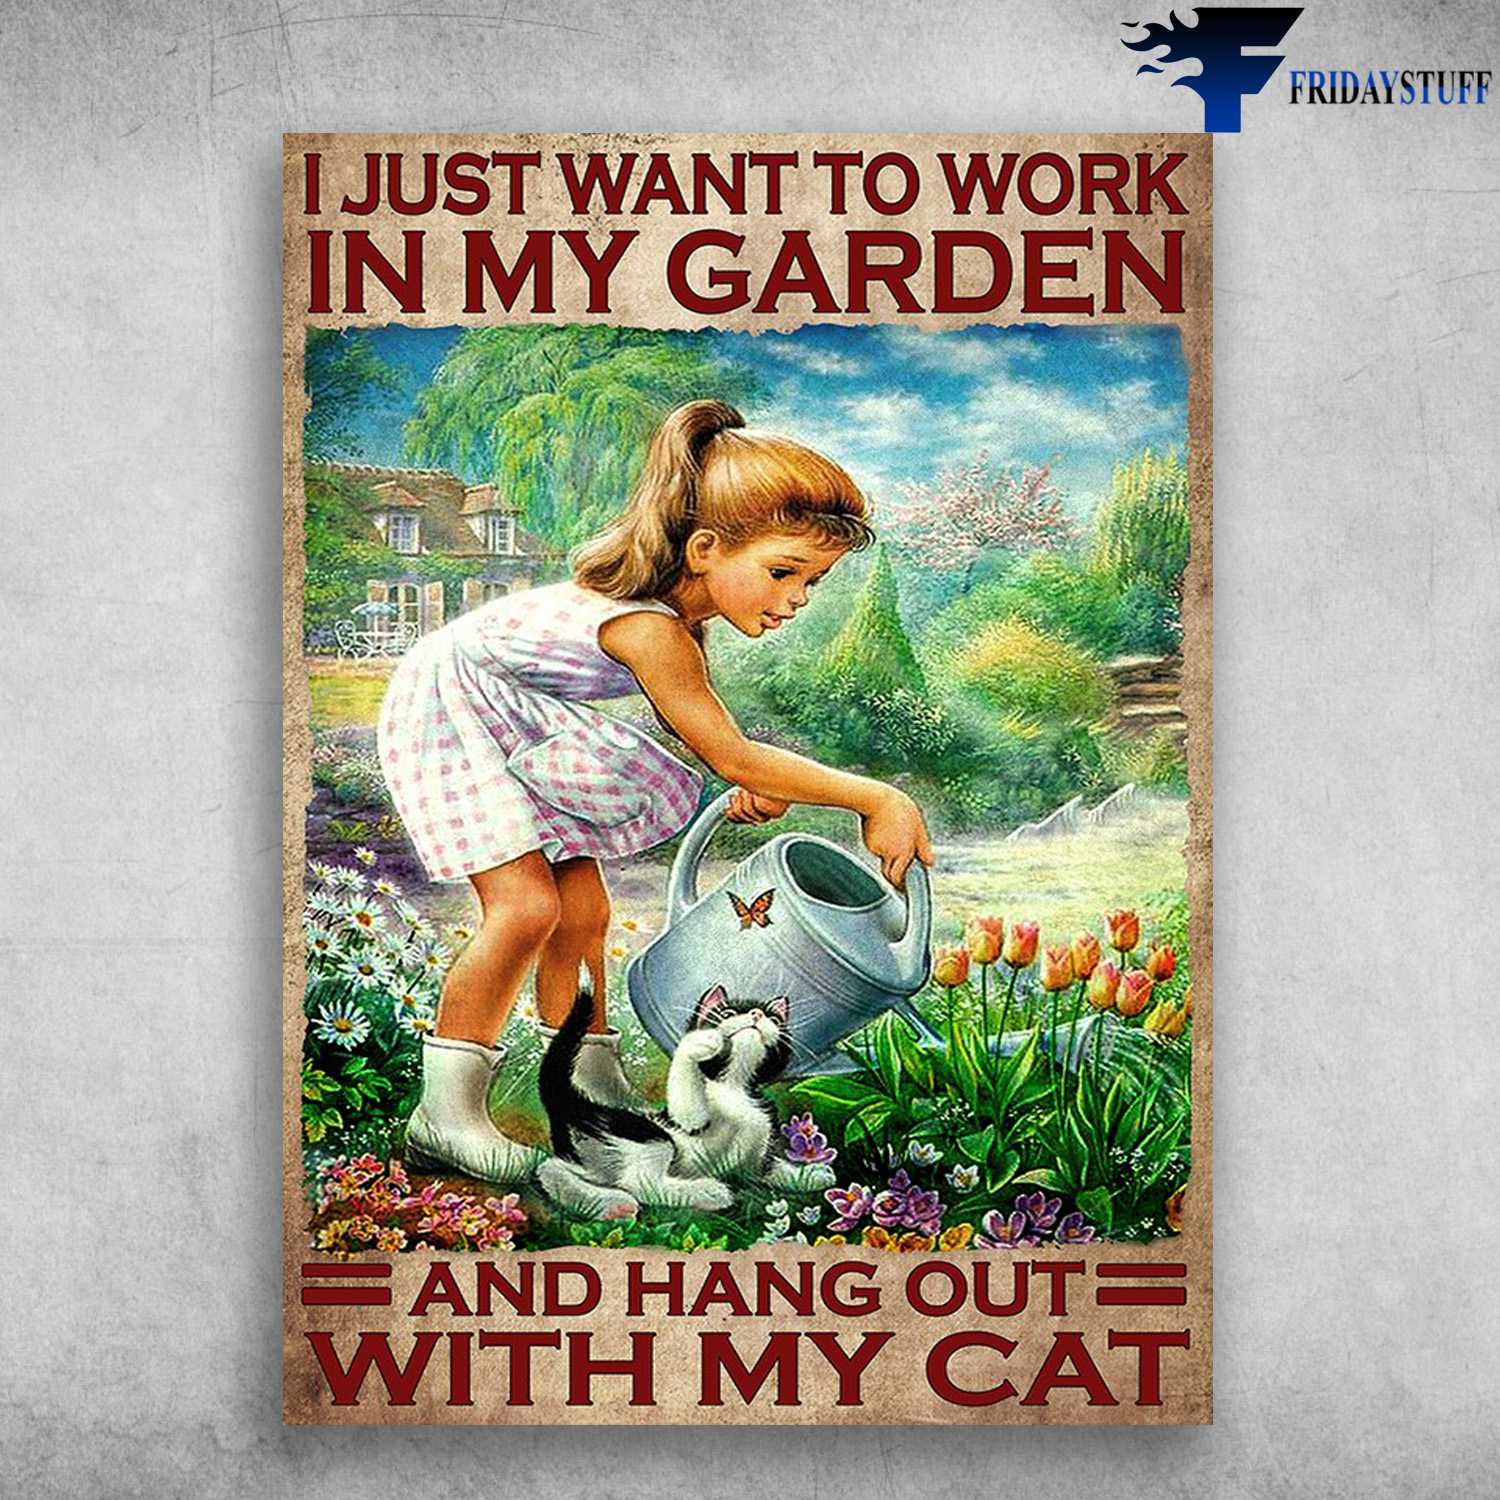 Gardening With Cat - I Just Want To Work In My Garden, And Hang Our With My Cat, Flower Garden